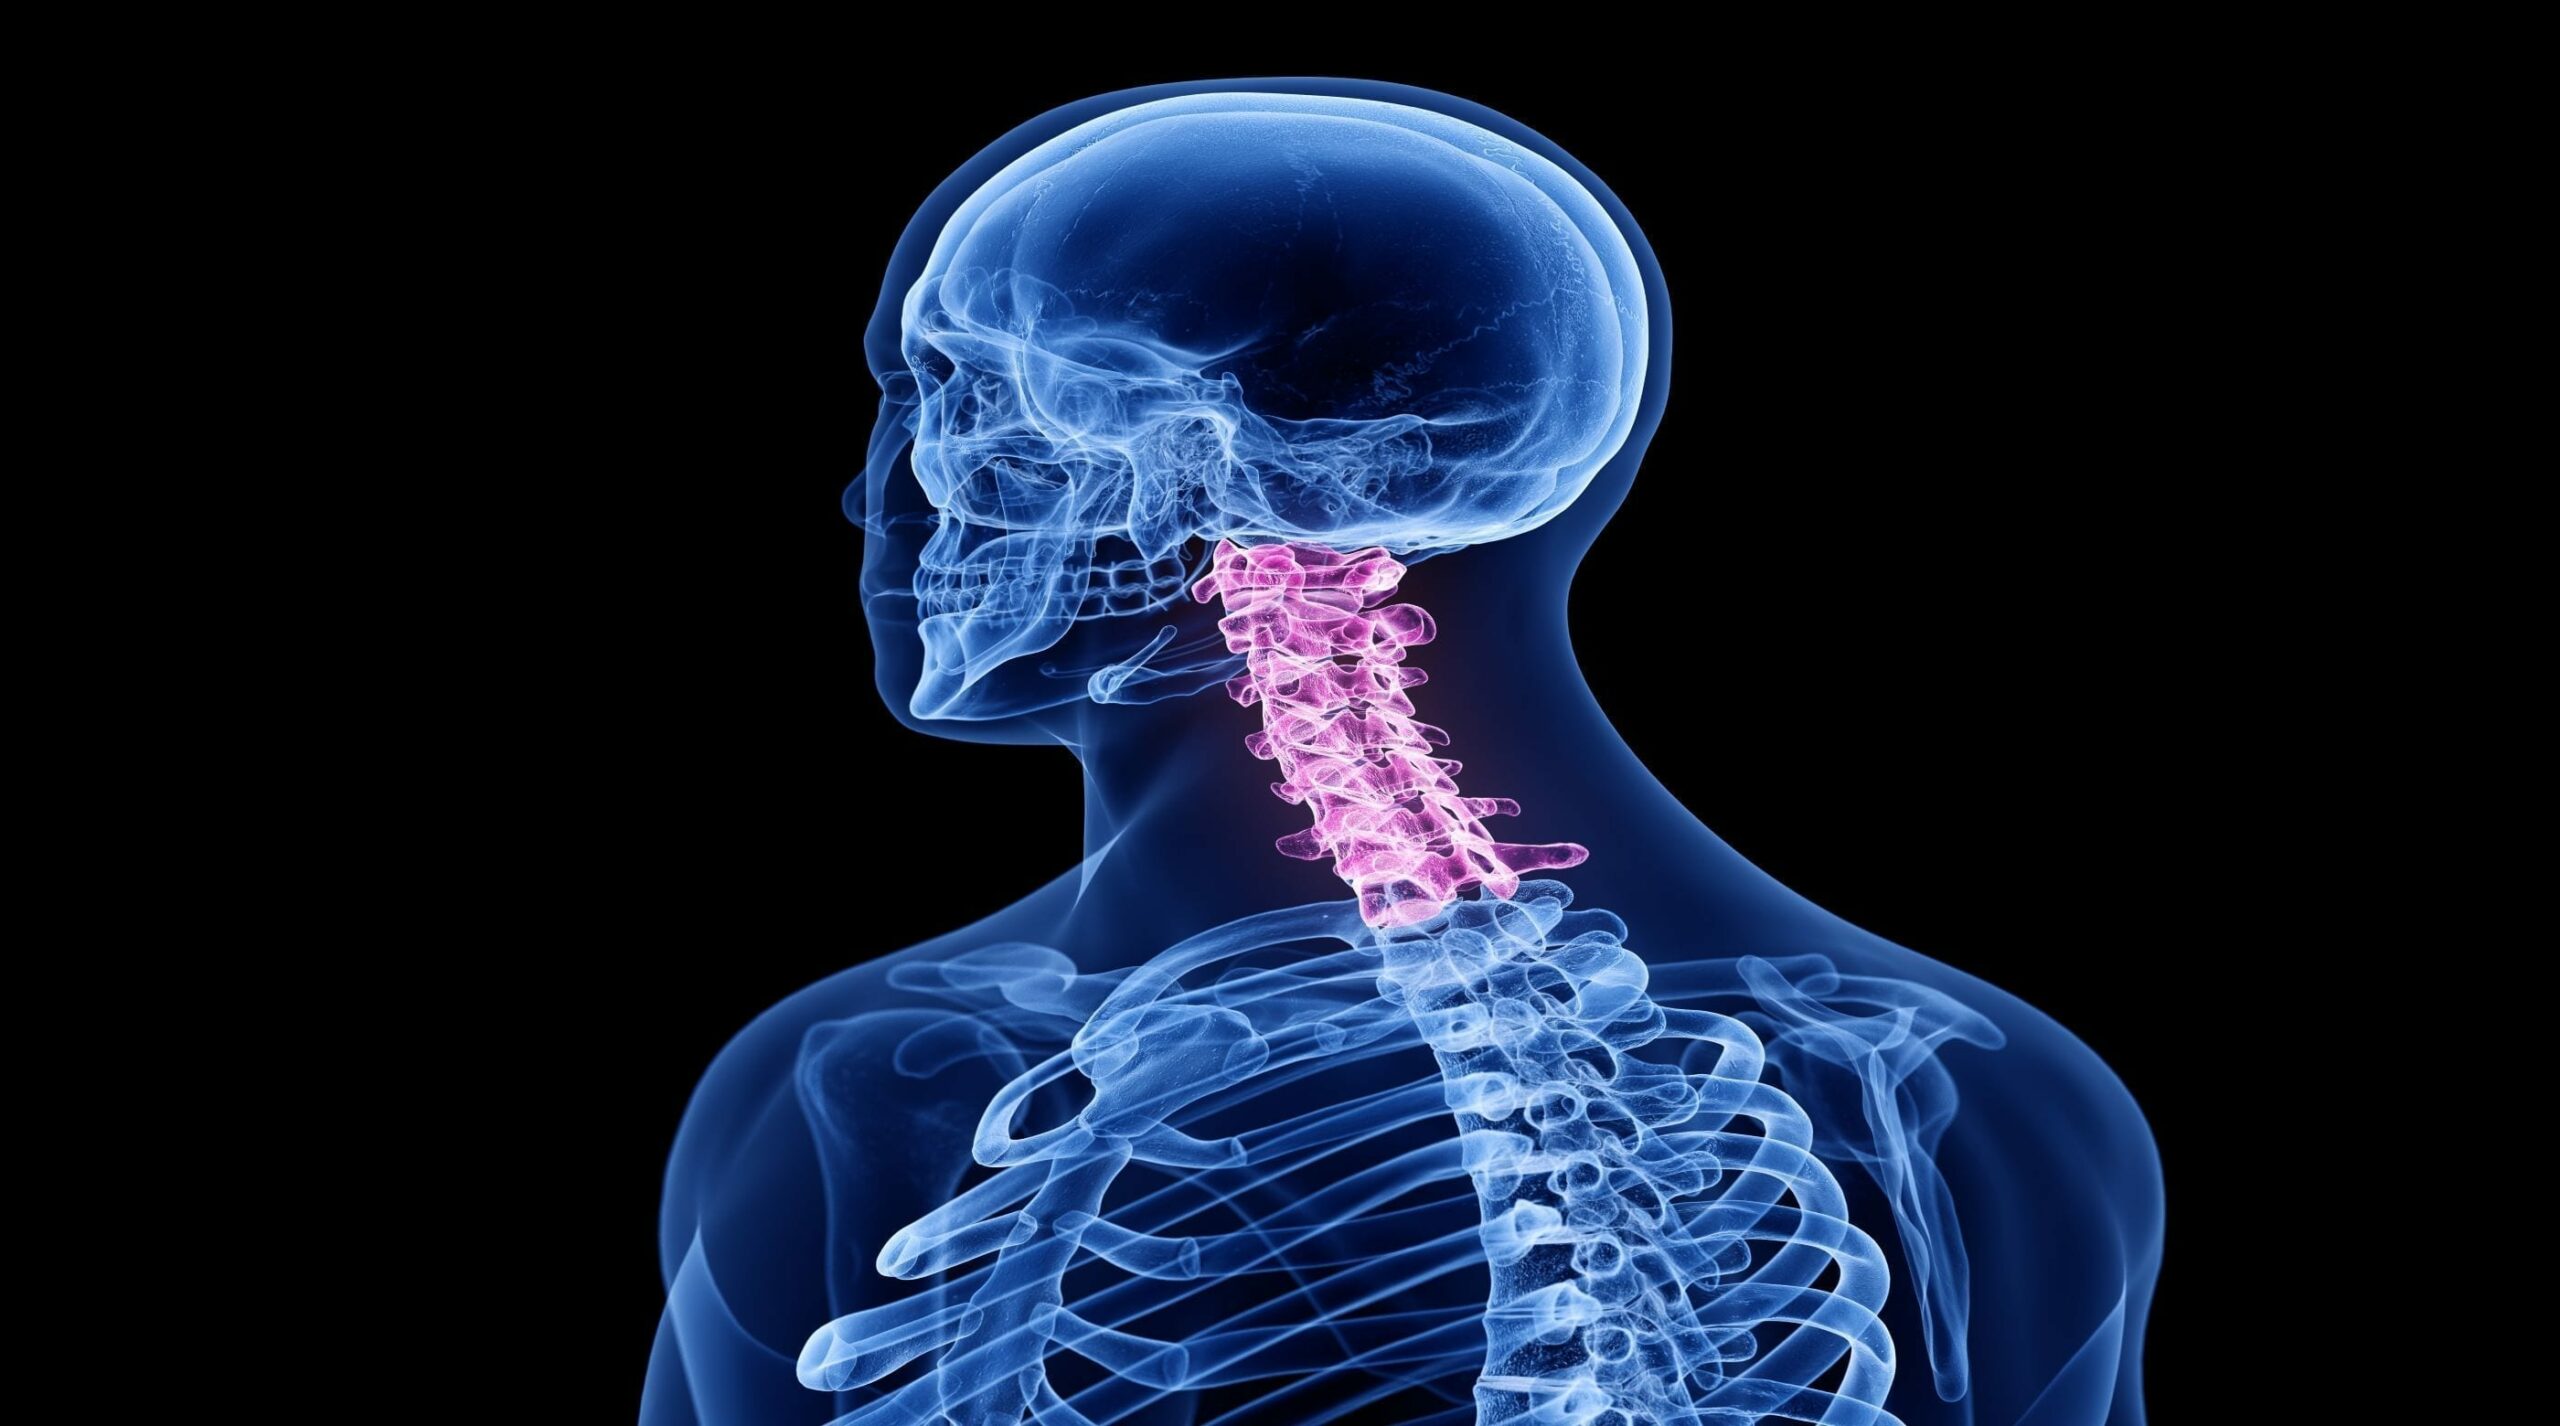 Structural Rehabilitation of the Cervical Spine (Module 4)